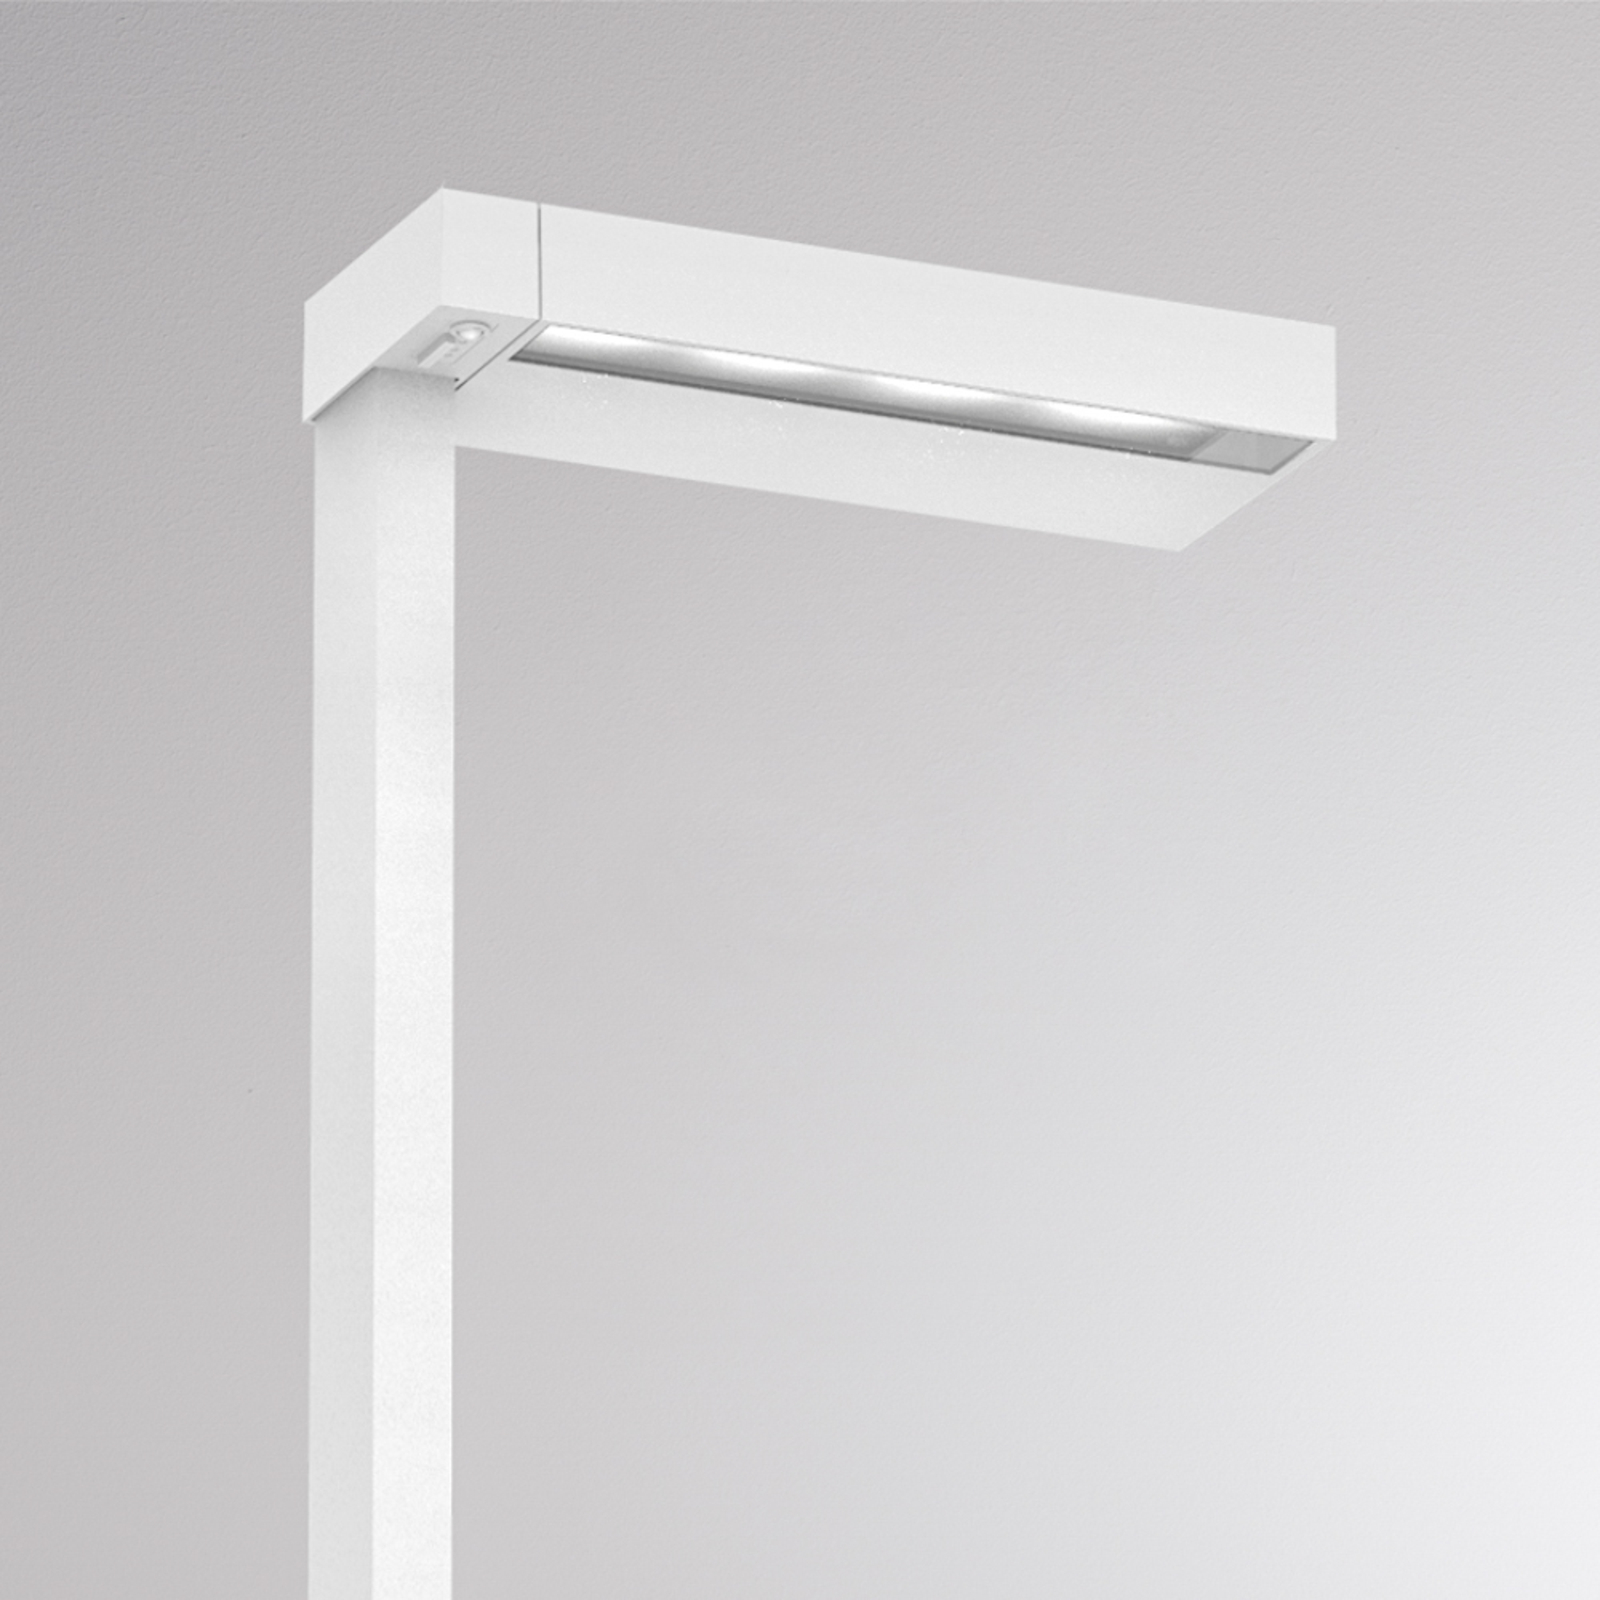 Molto Luce Concept Right F Stehlampe dimmbar weiß